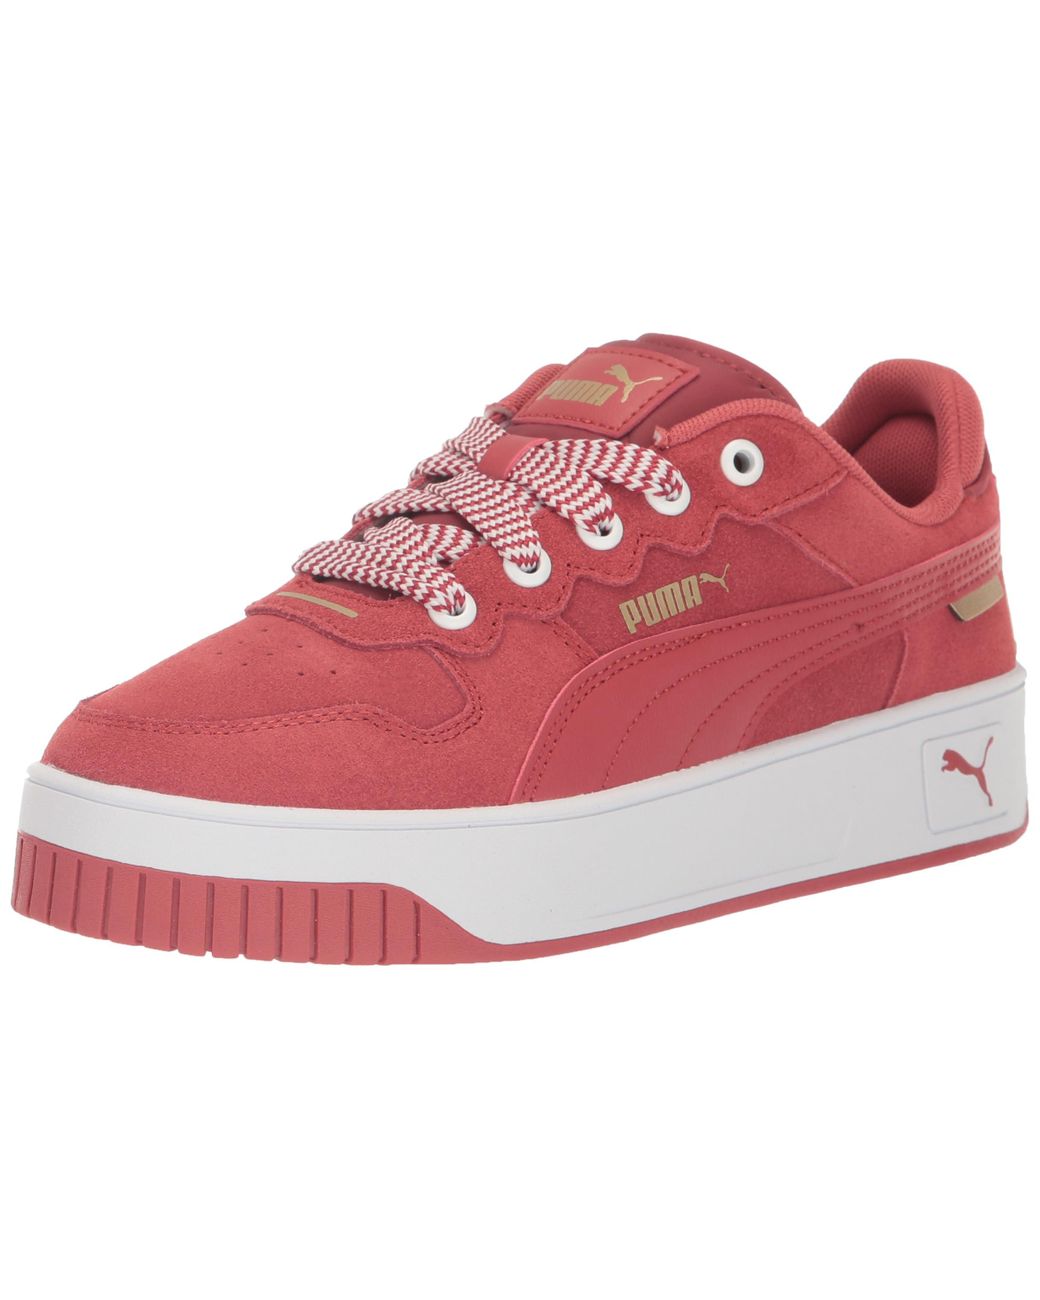 PUMA Carina Street Thick Laces Sneaker in Red | Lyst